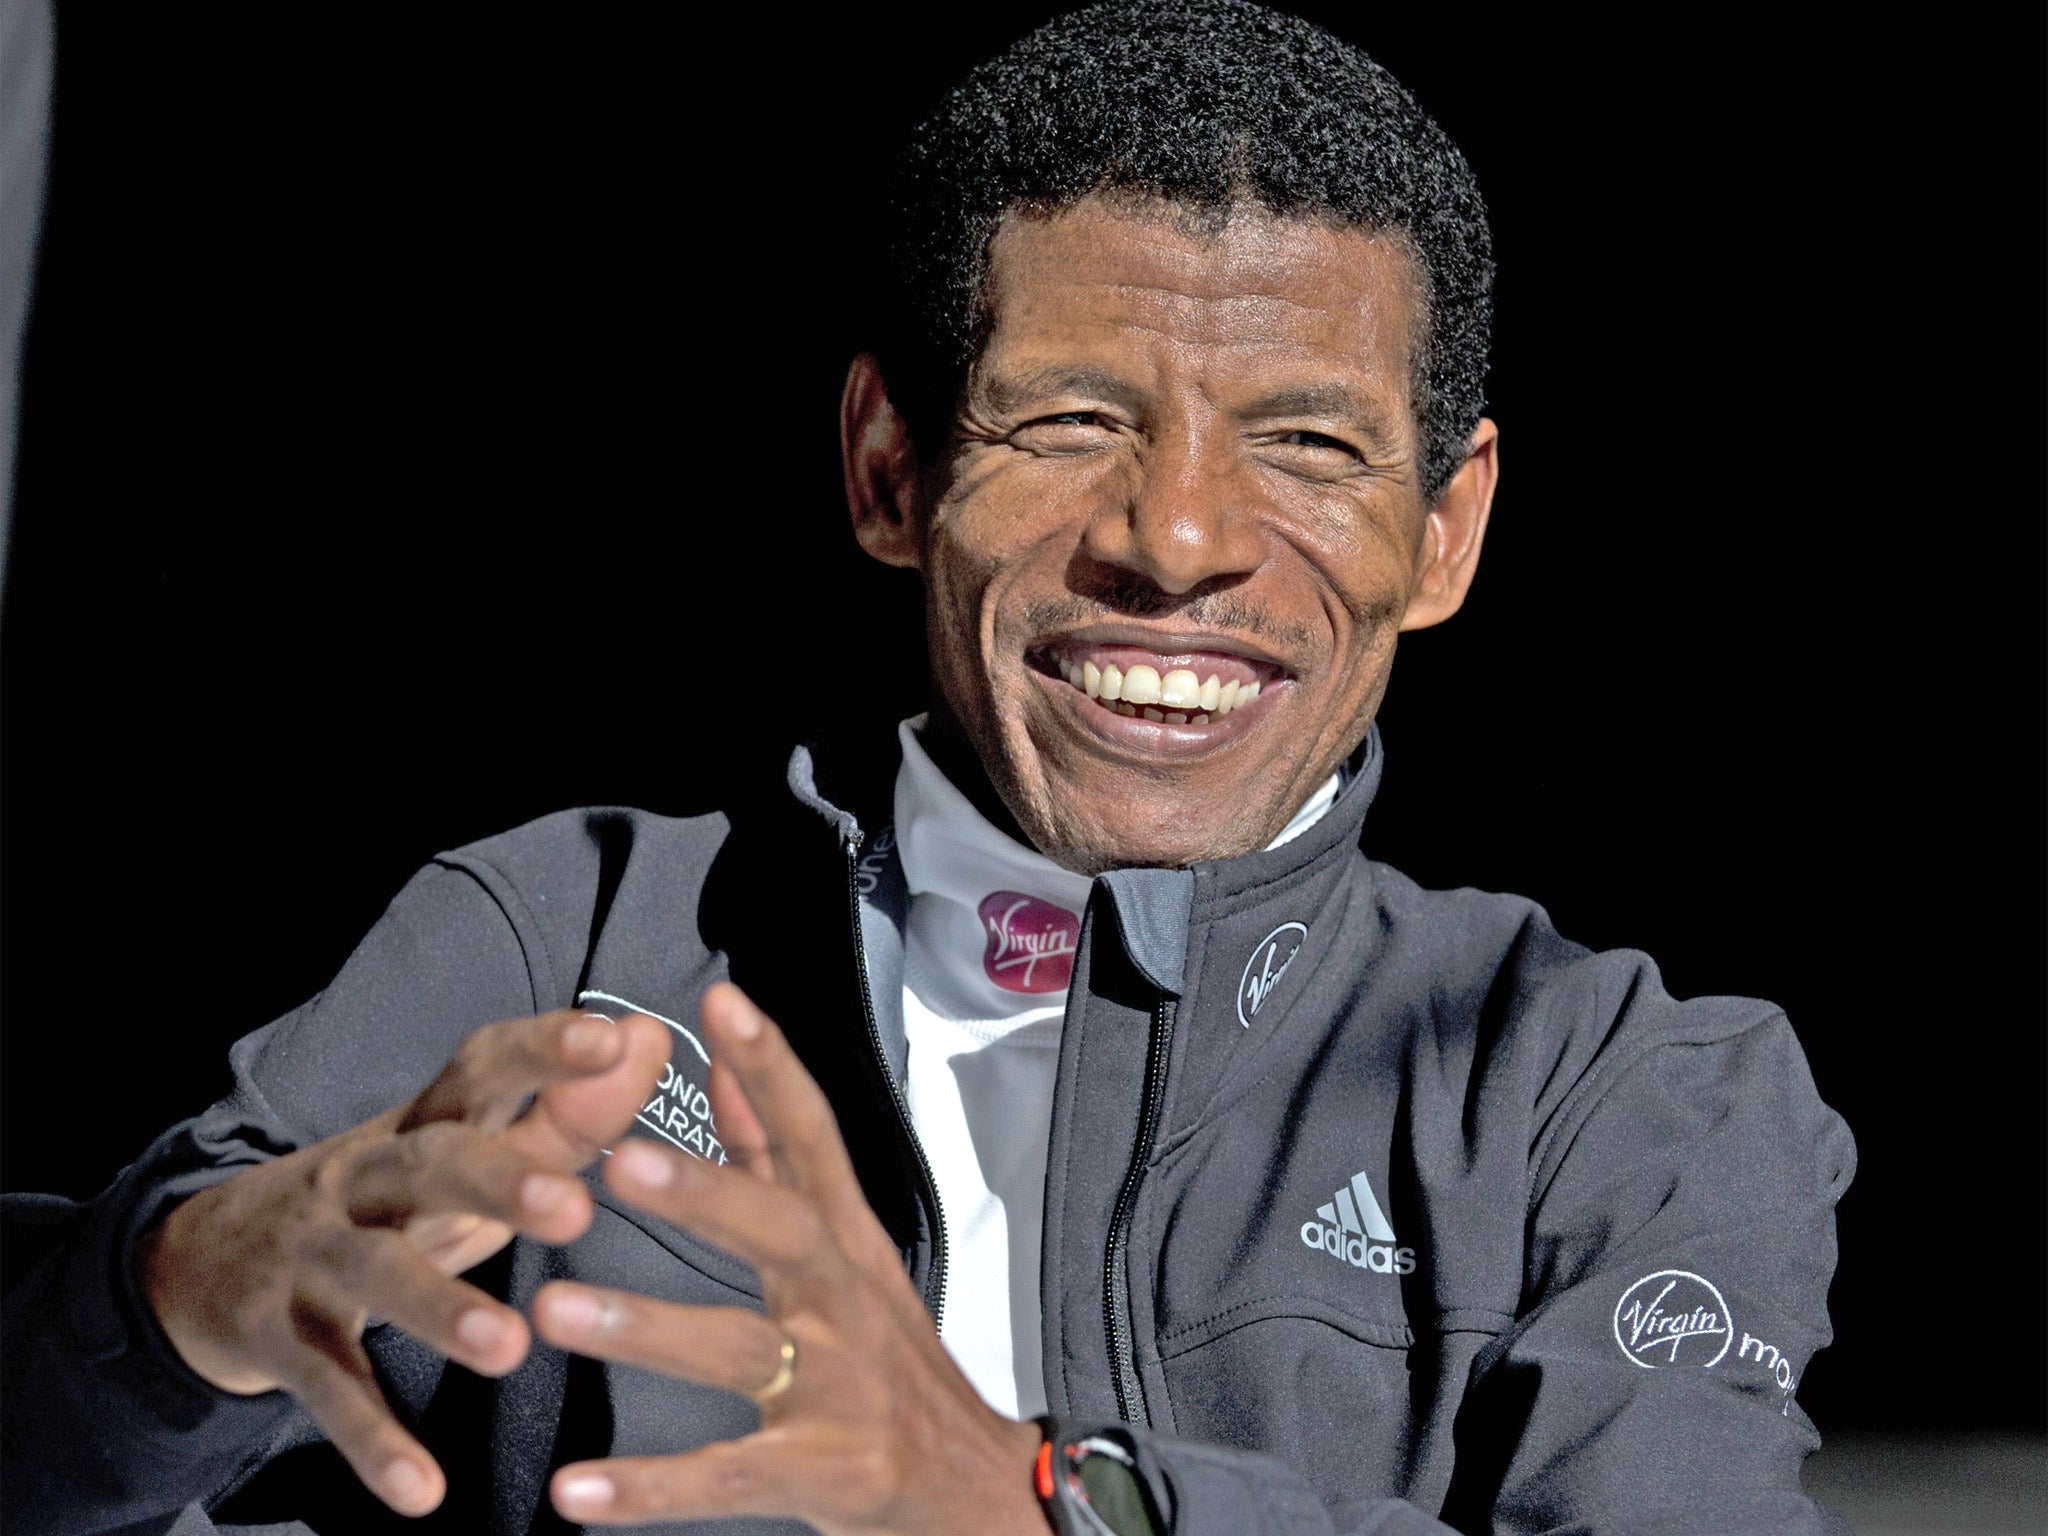 The return of land bonuses coincided with Gebrselassie’s appointment as president of the Ethiopian Athletics Federation